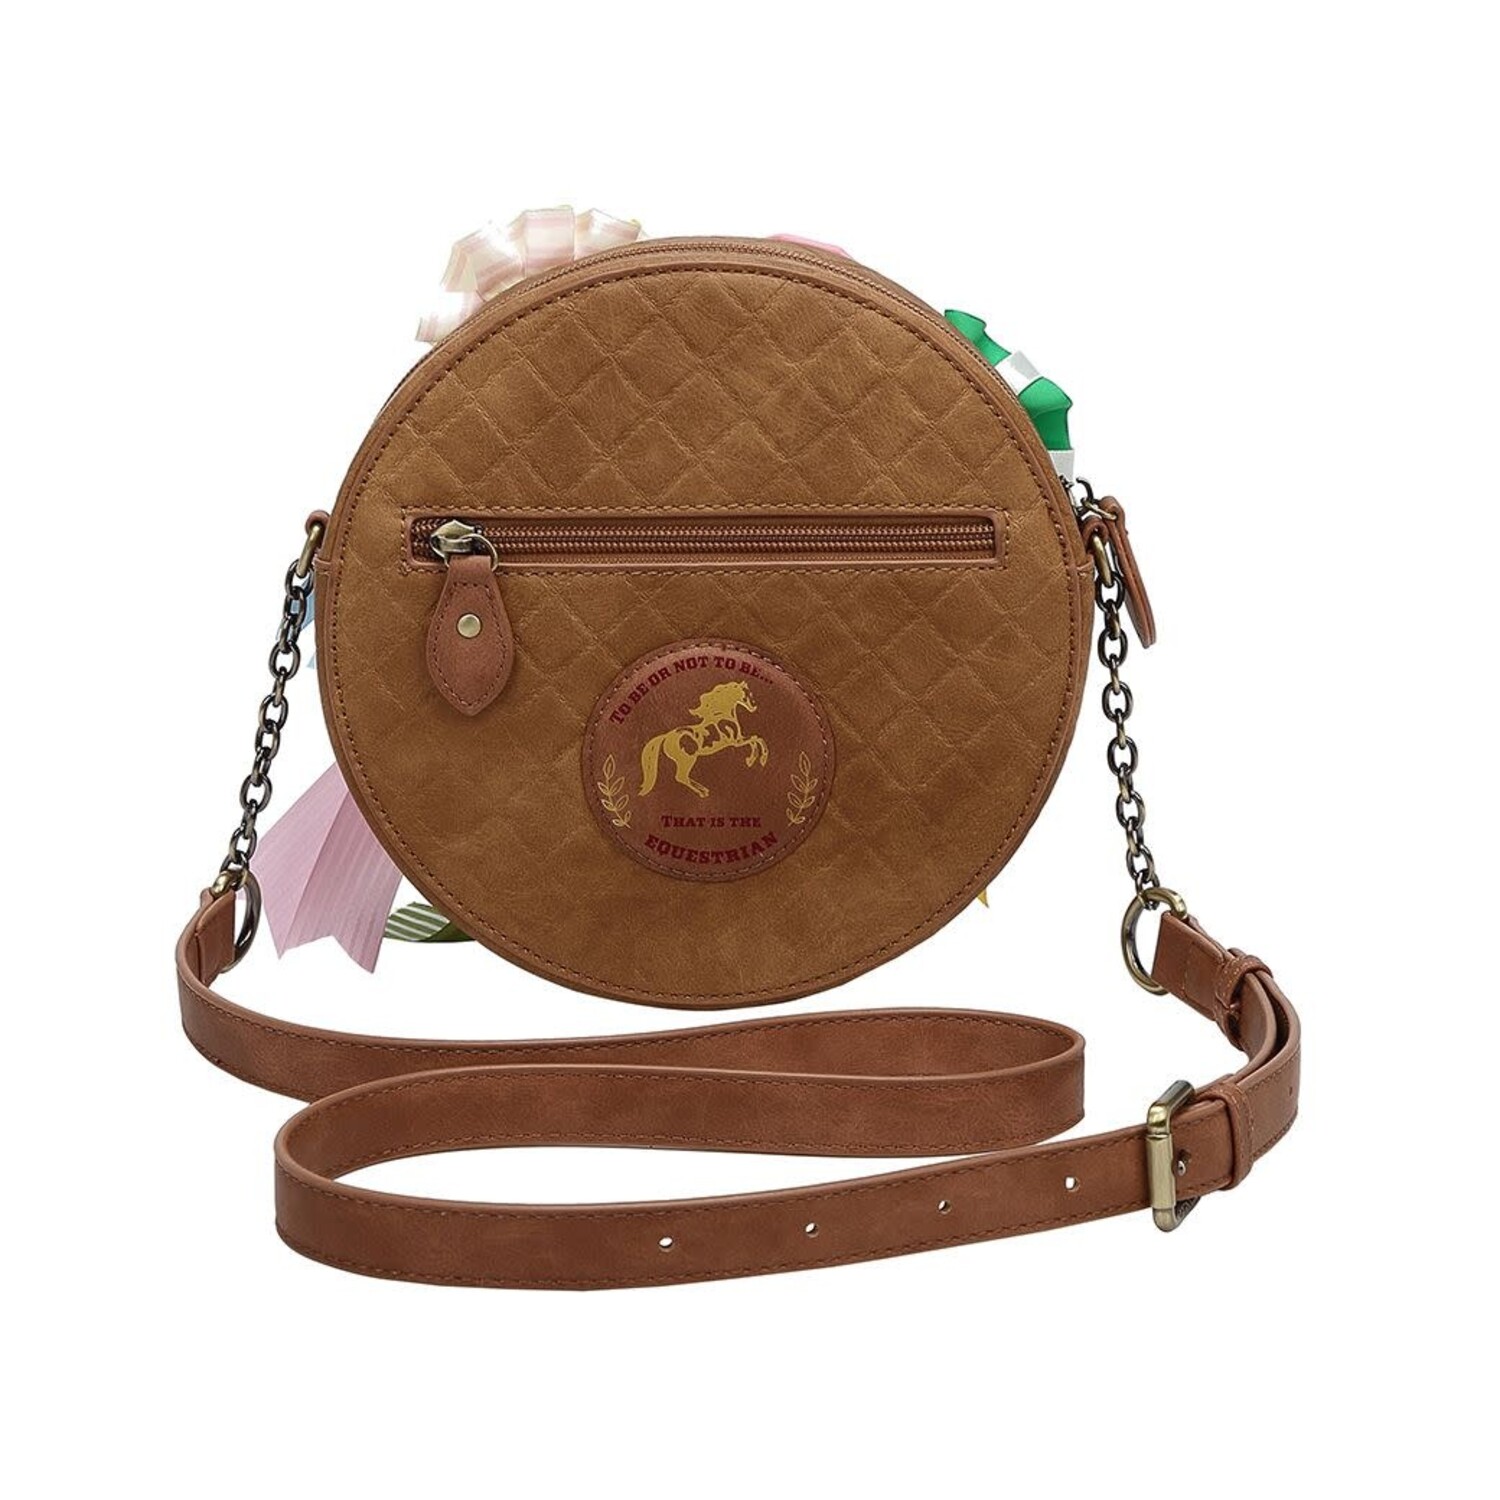 Buy Genuine Leather Bags and Accessories For Women Online | Hidesign